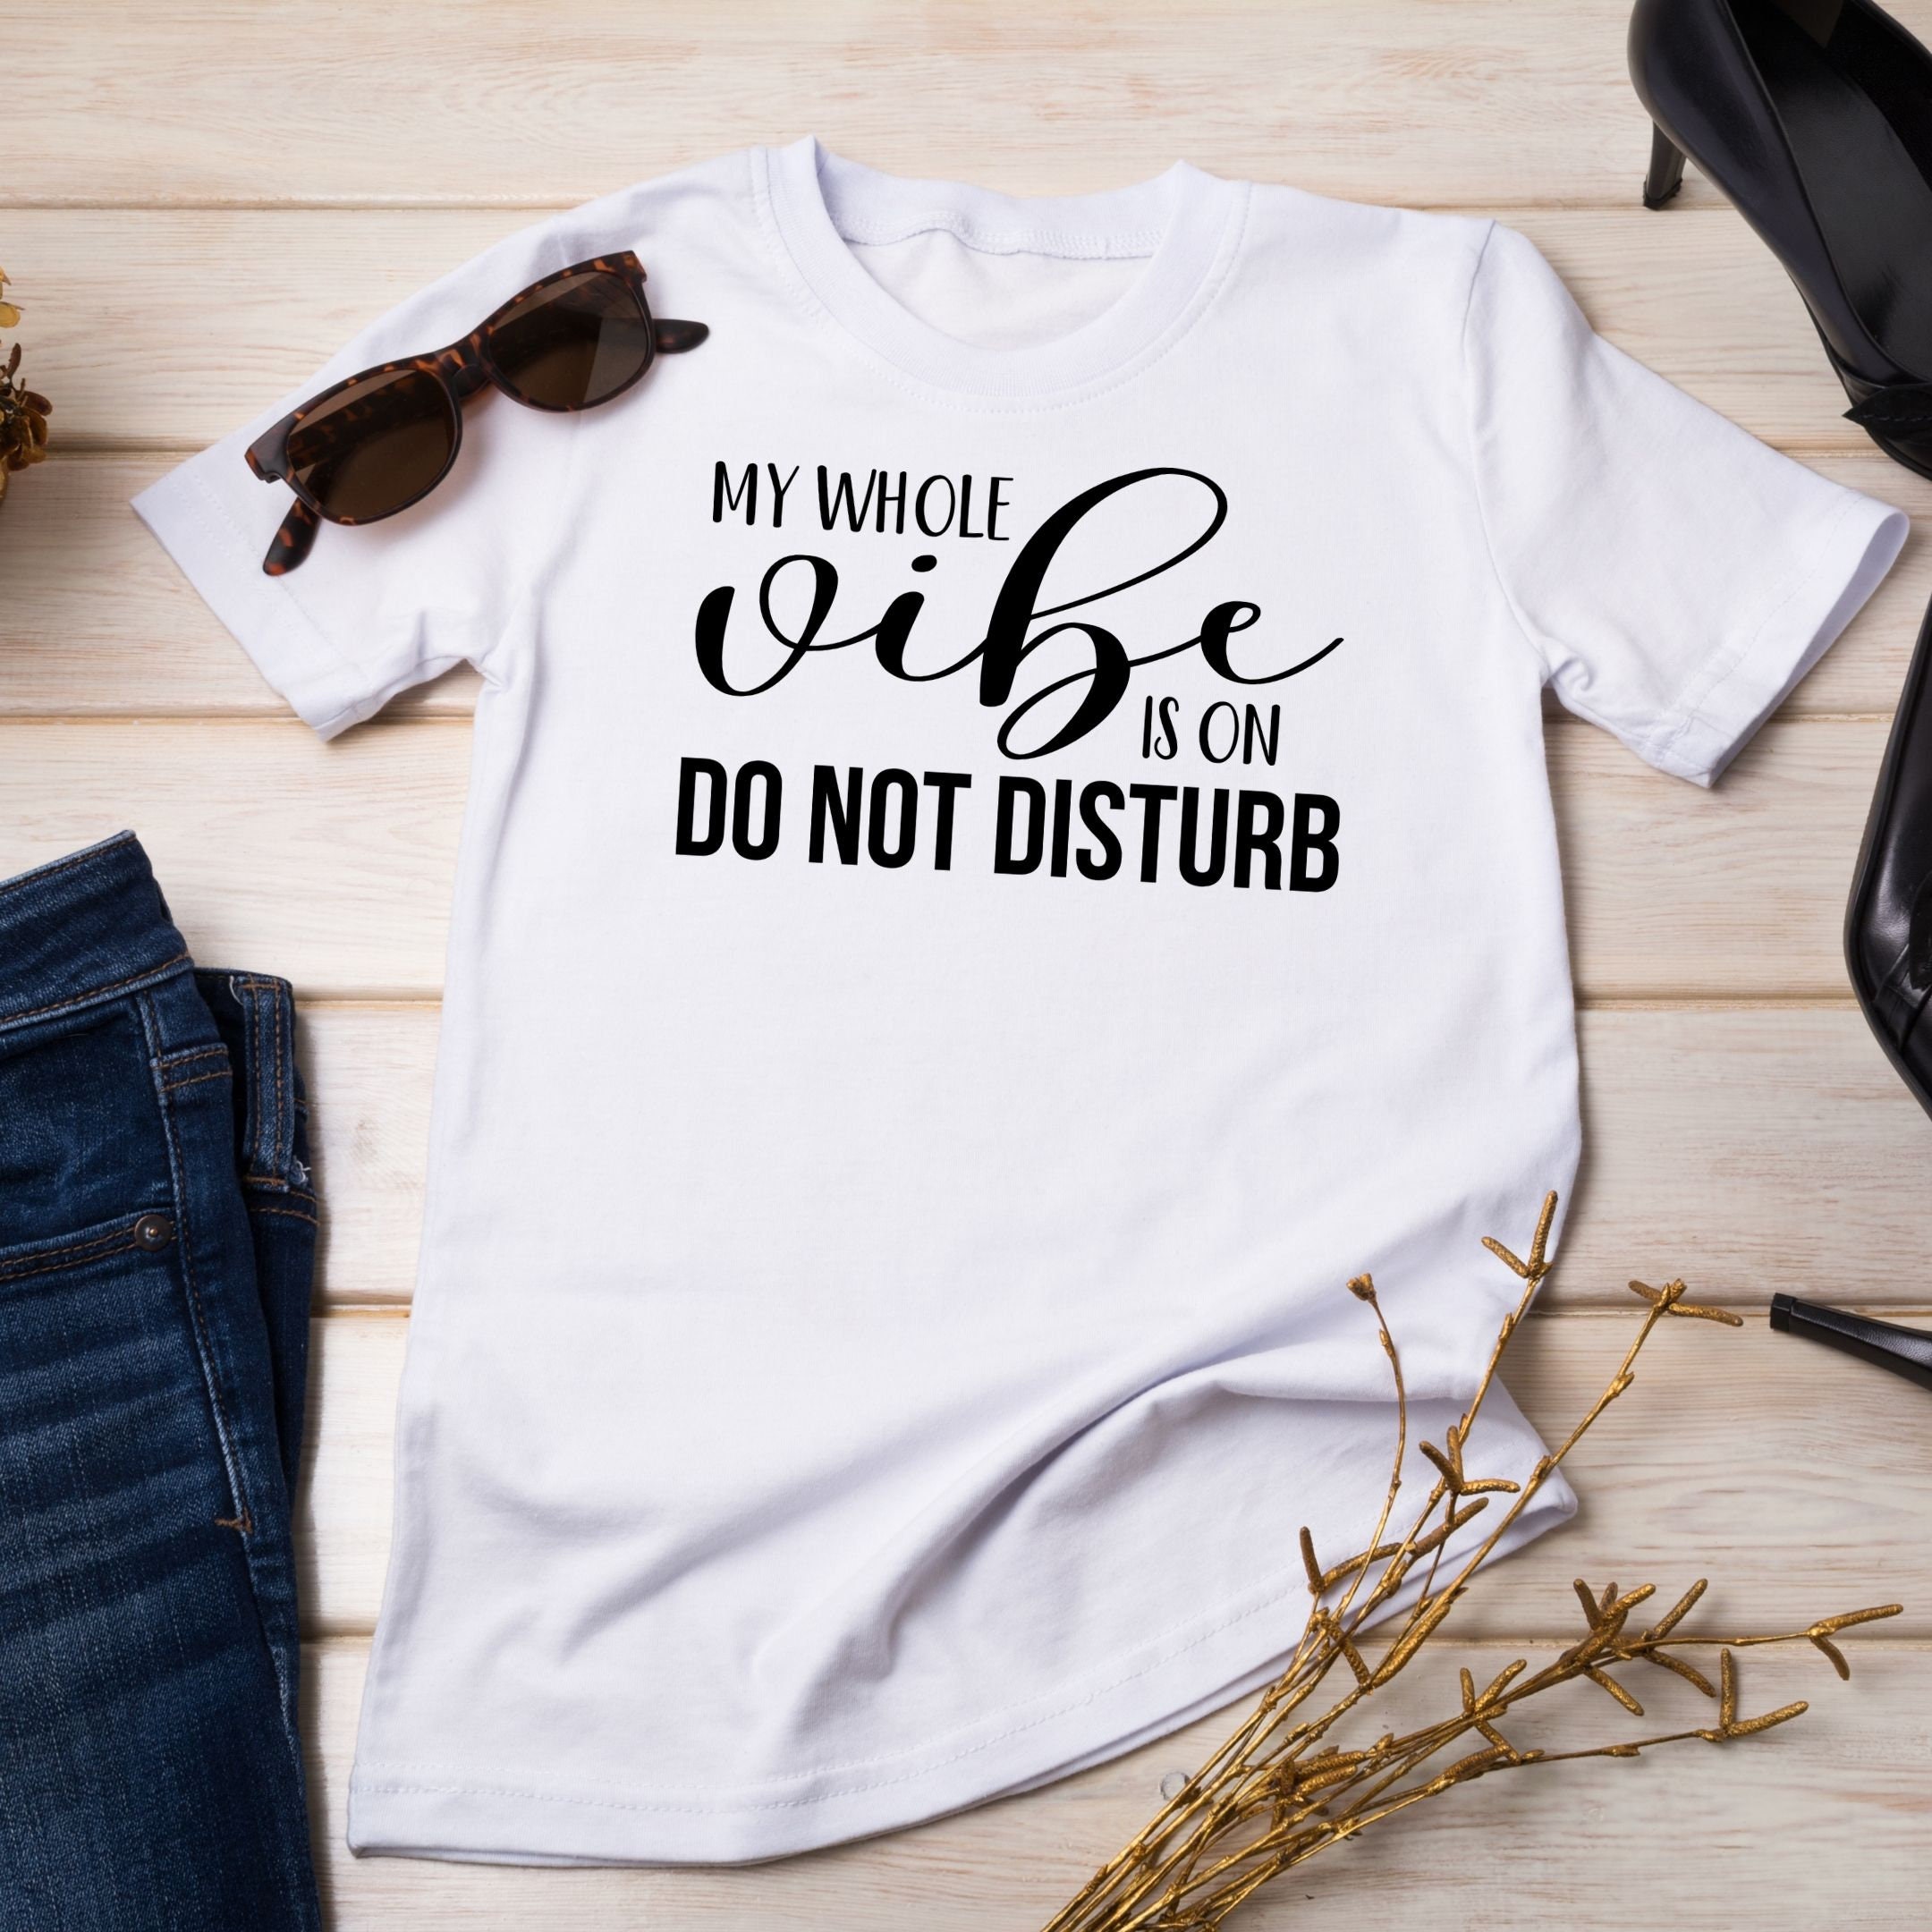 My Whole Vibe is on Do Not Disturb SVG Vinyl Cut File for - Etsy